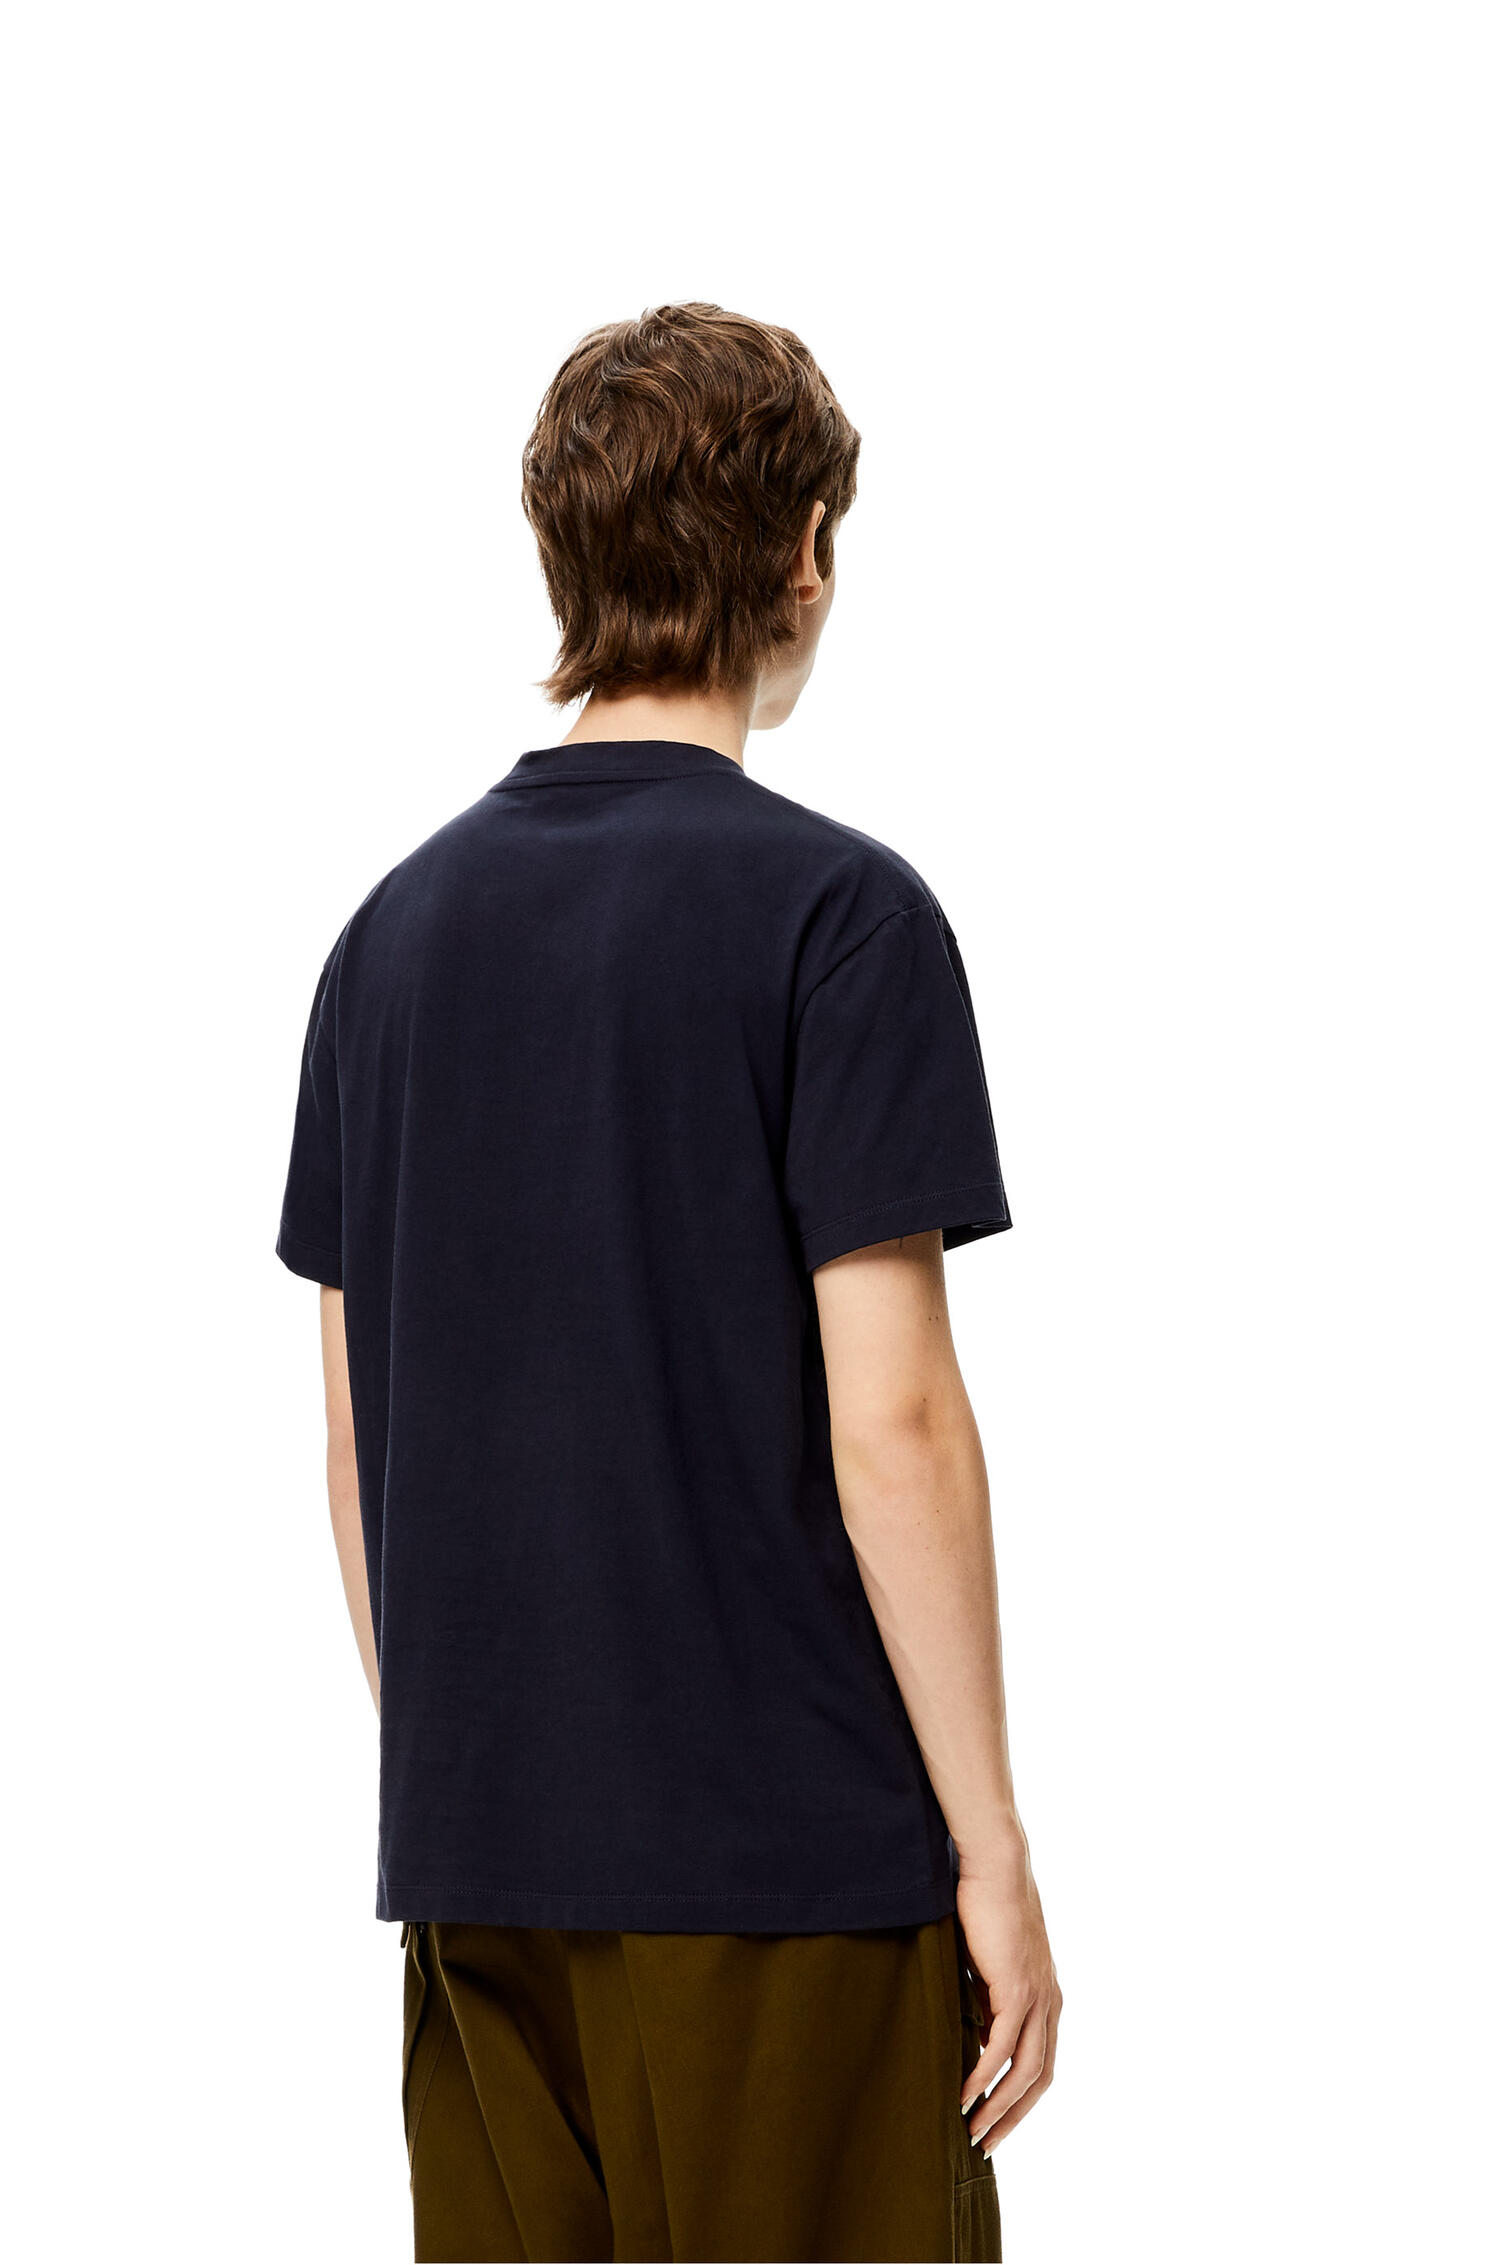 LOEWE embroidered T-shirt in cotton Navy Blue - LOEWE